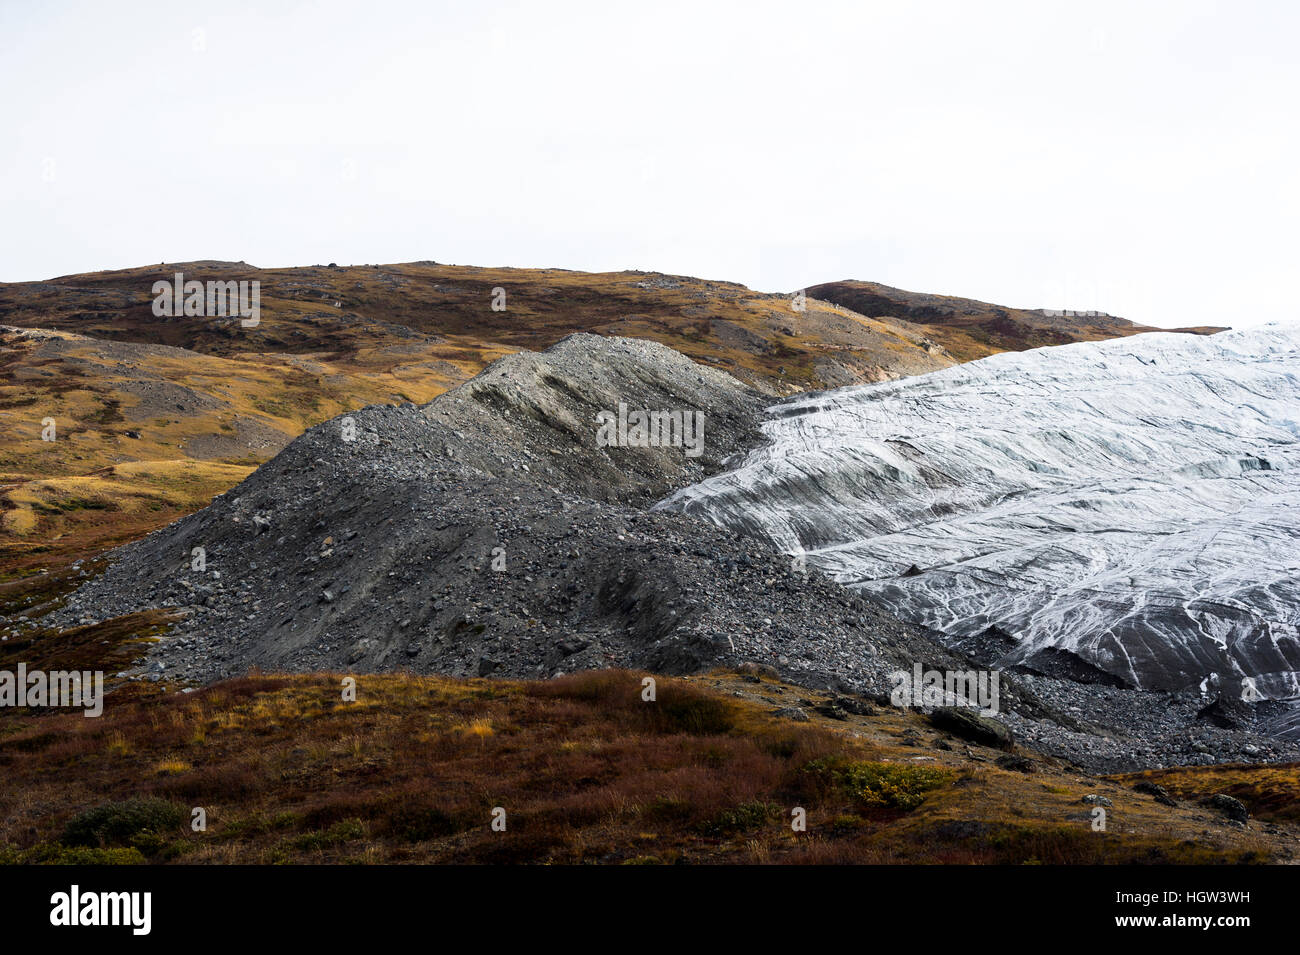 A pile of rock and silt debris deposited by the leading edge of a glacier. Stock Photo